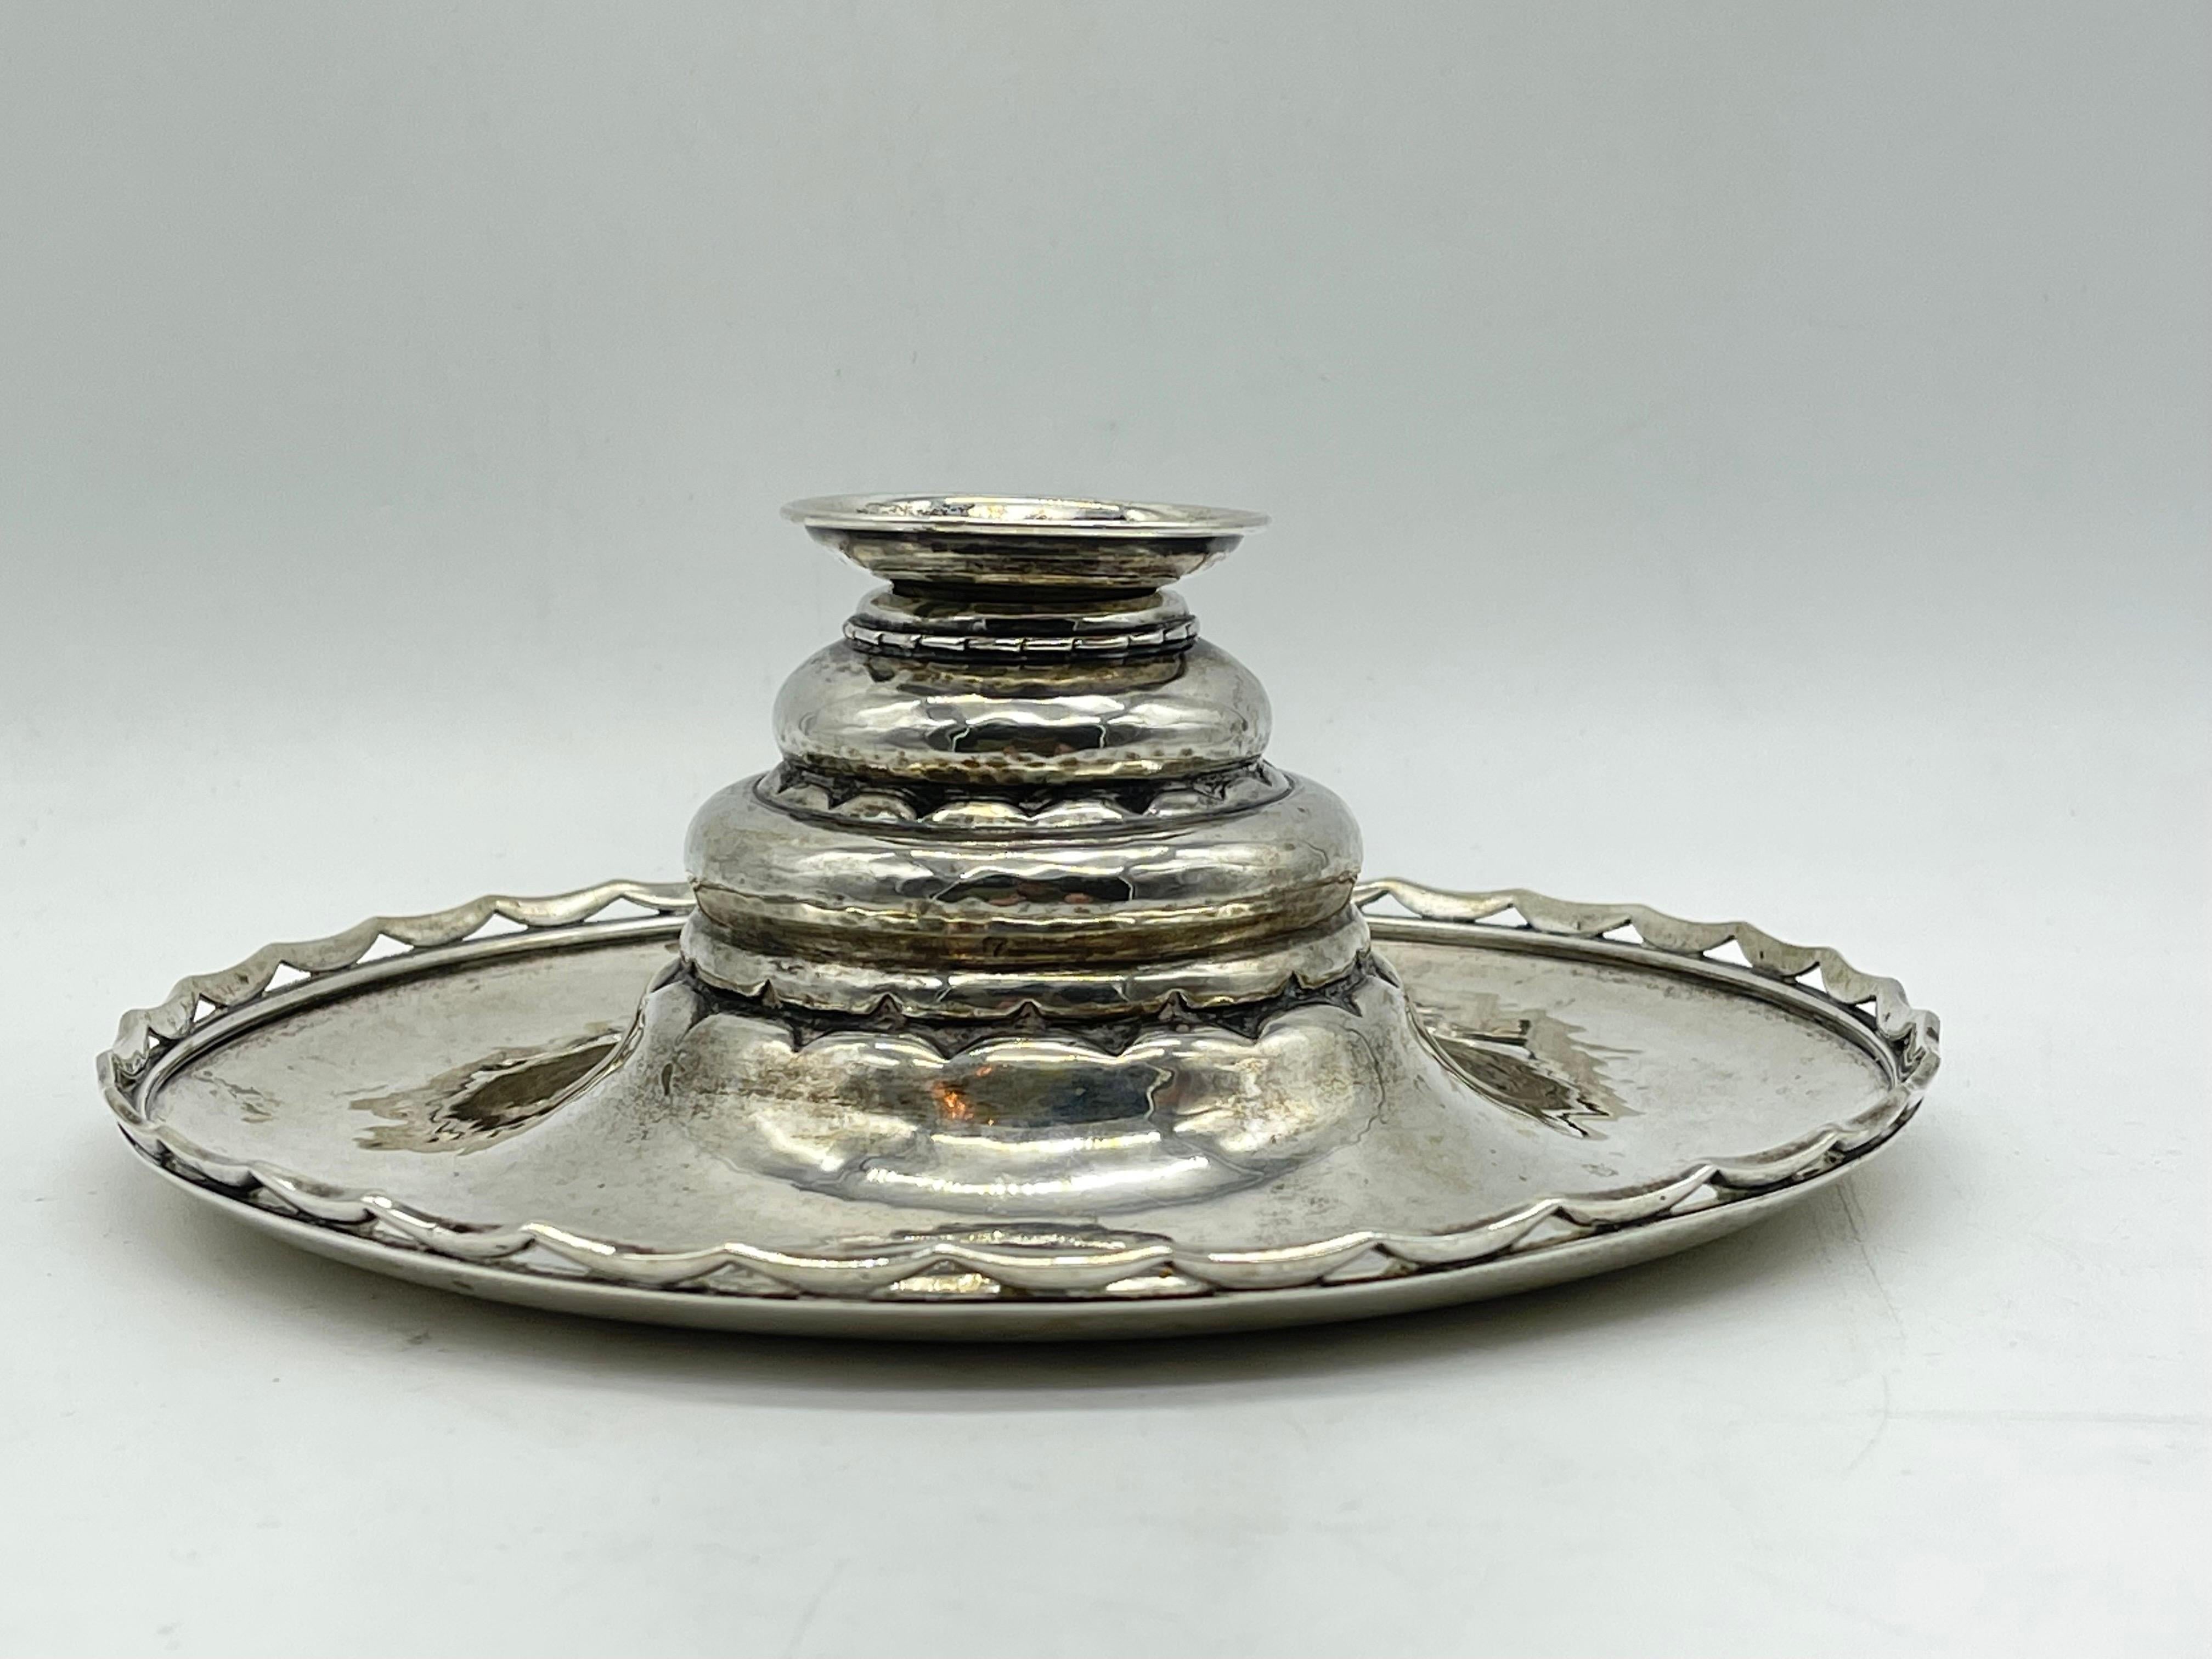 Antique Art Deco Silver candlestick

830 Heimbürger Silver - Copenhagen Denmark
Very Rare

Weight: 313 grams

The condition can be seen in the pictures.